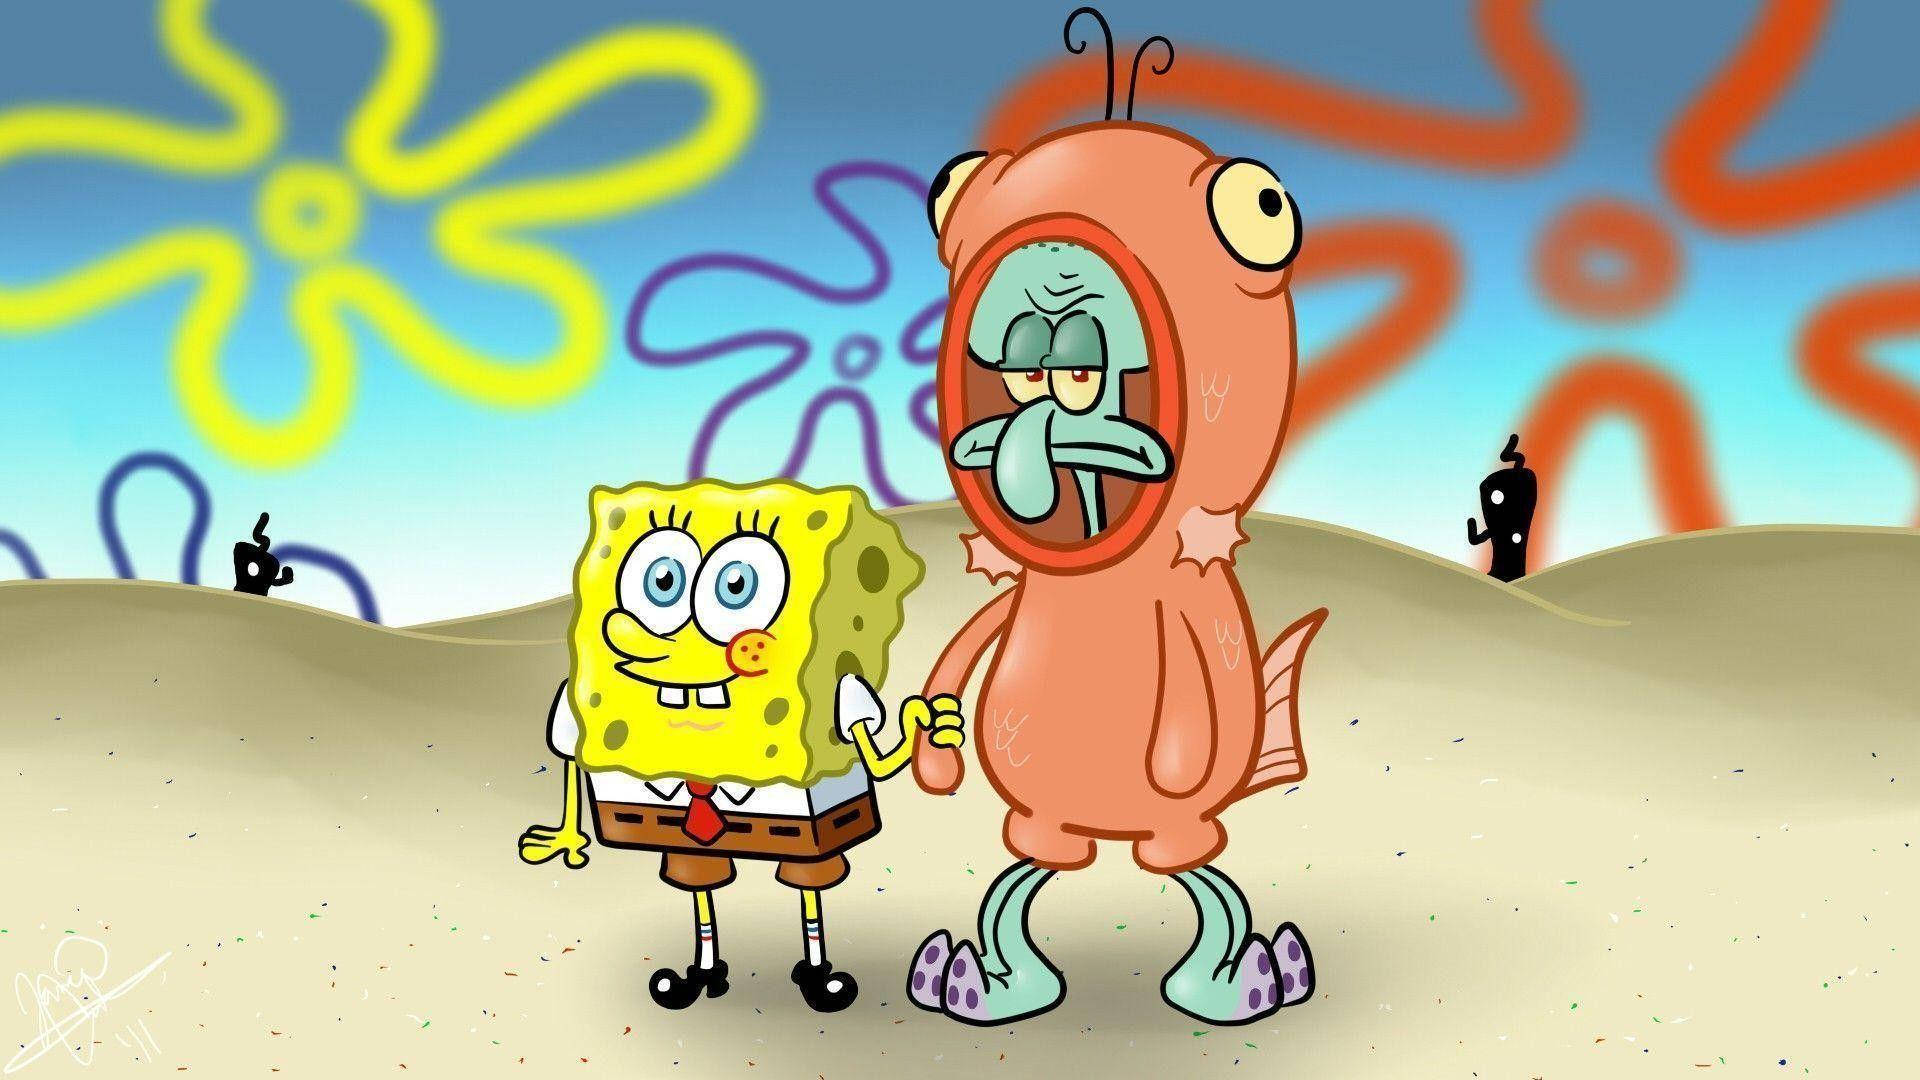 Cute Spongebob And Annoyed Squidward Holding Hands Background